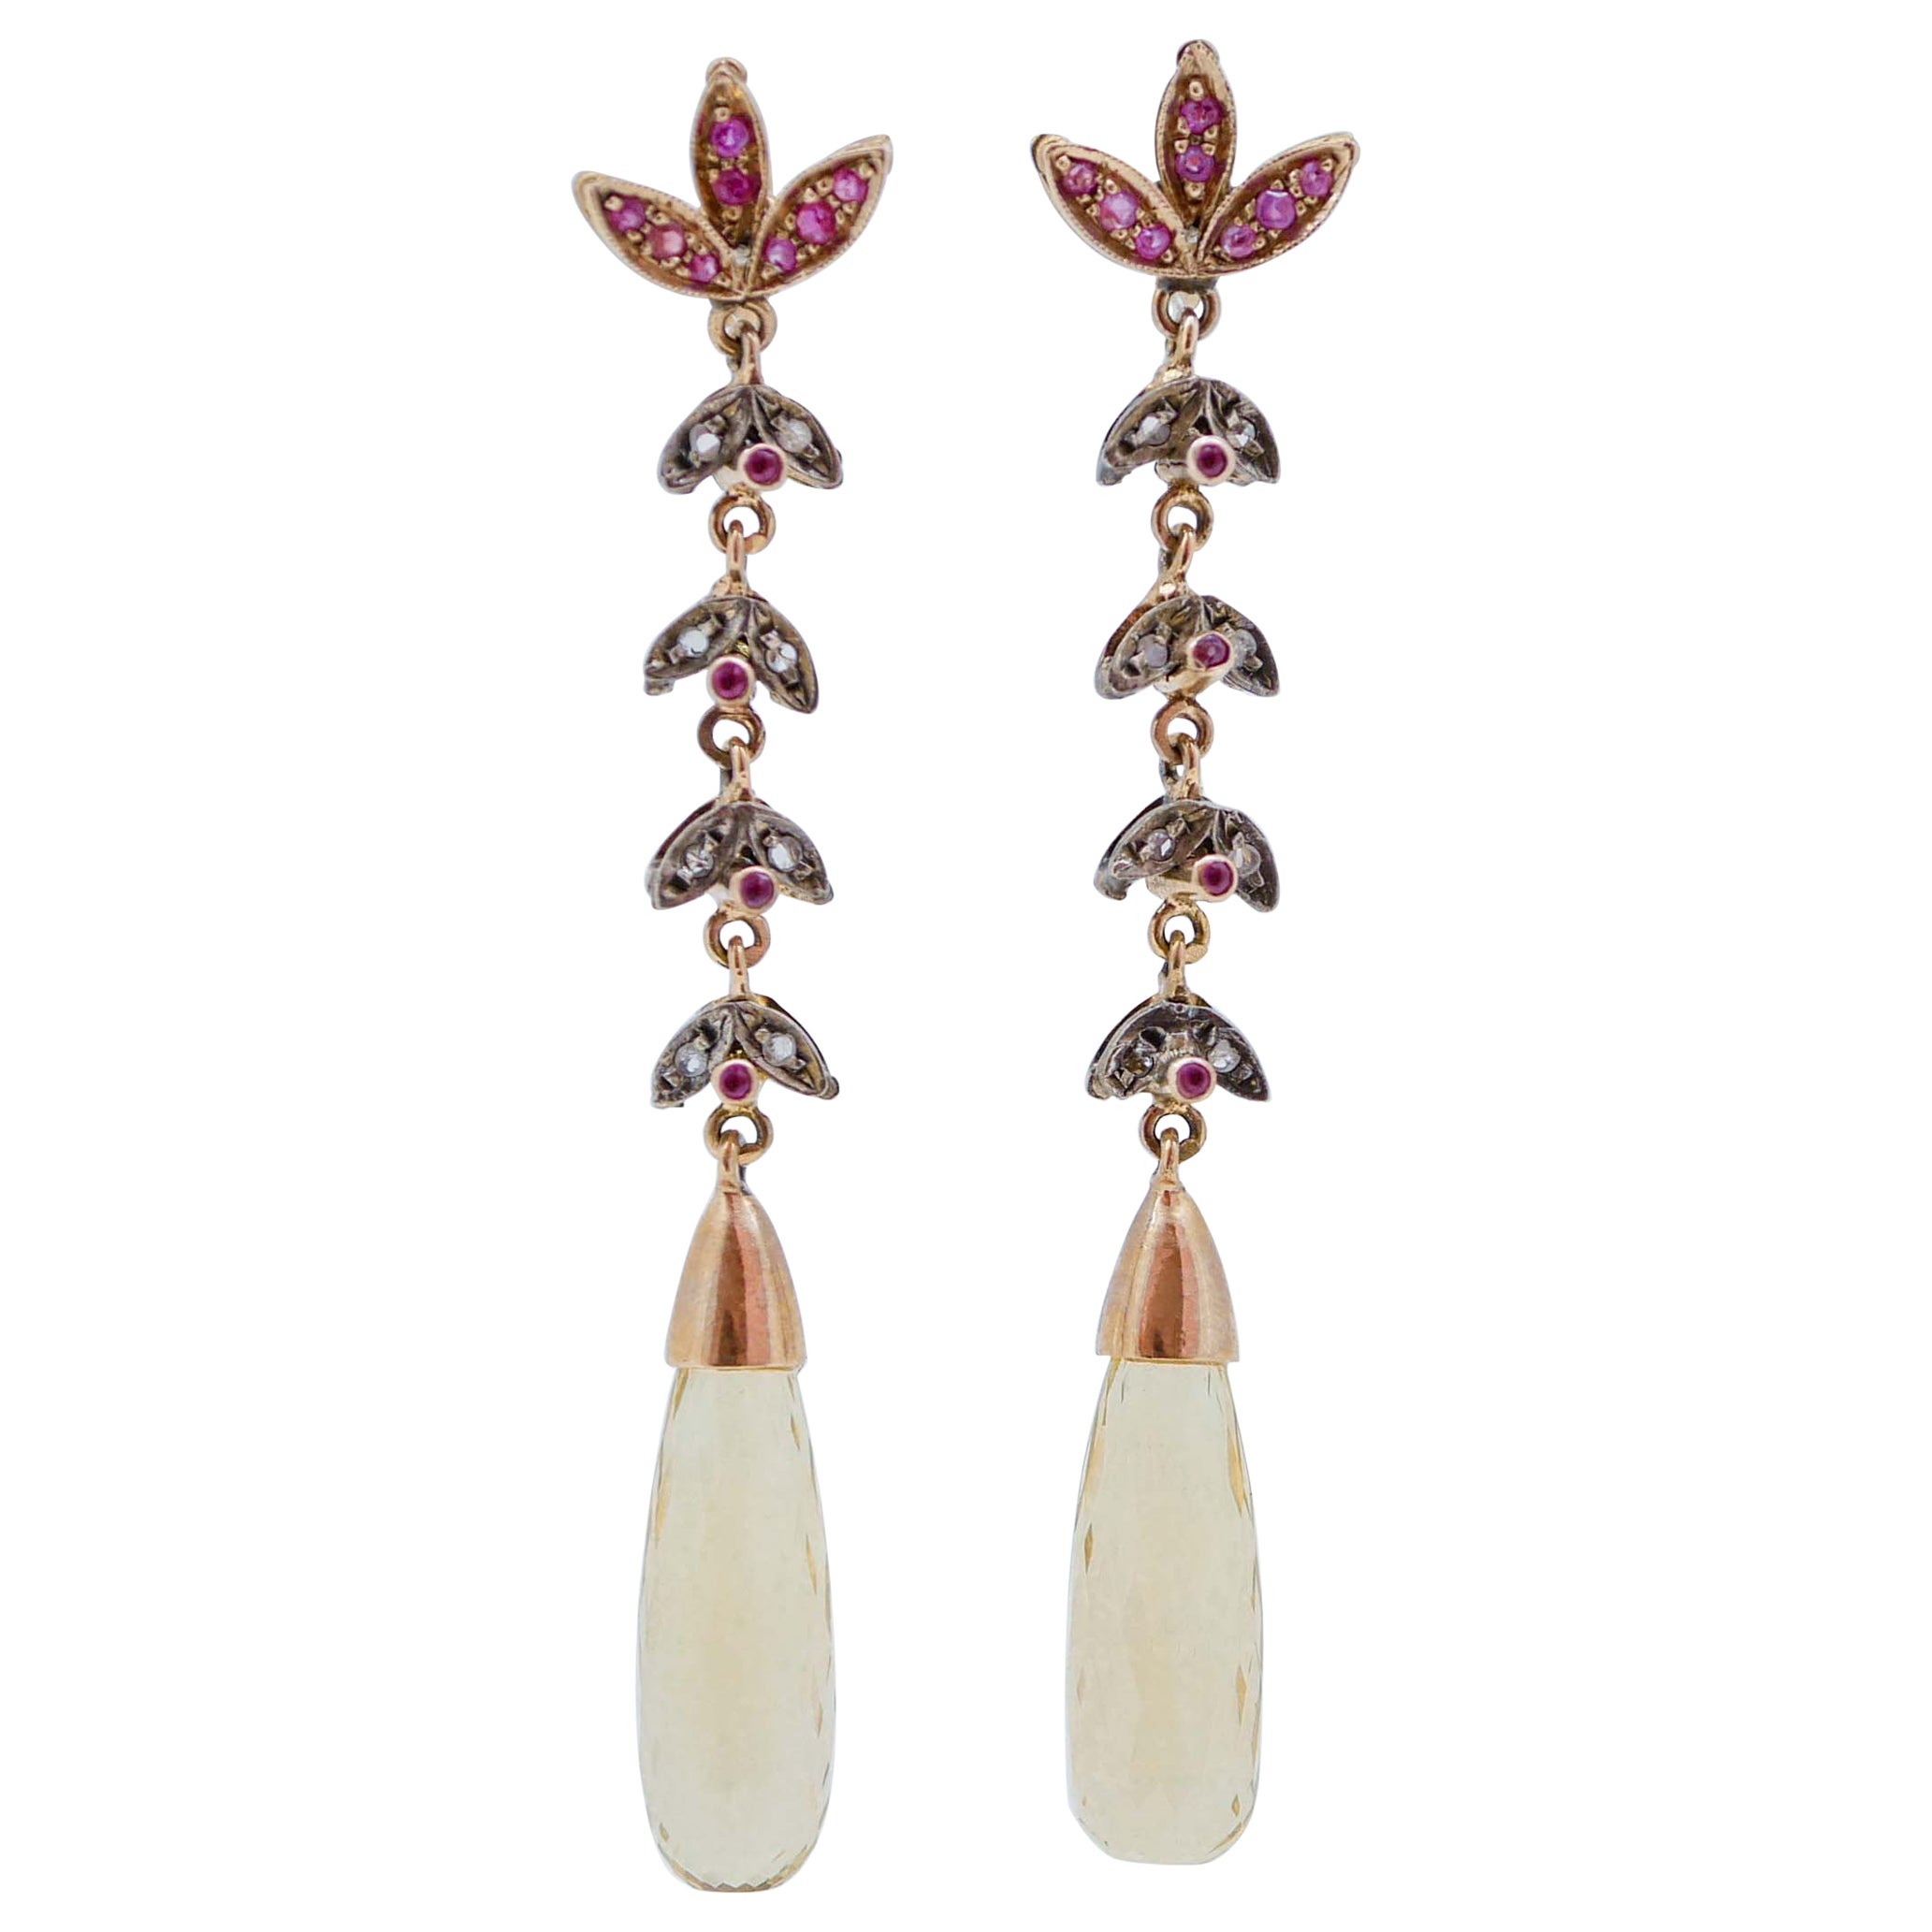 Topazs, Rubies, Diamonds, Rose Gold and Silver Earrings.